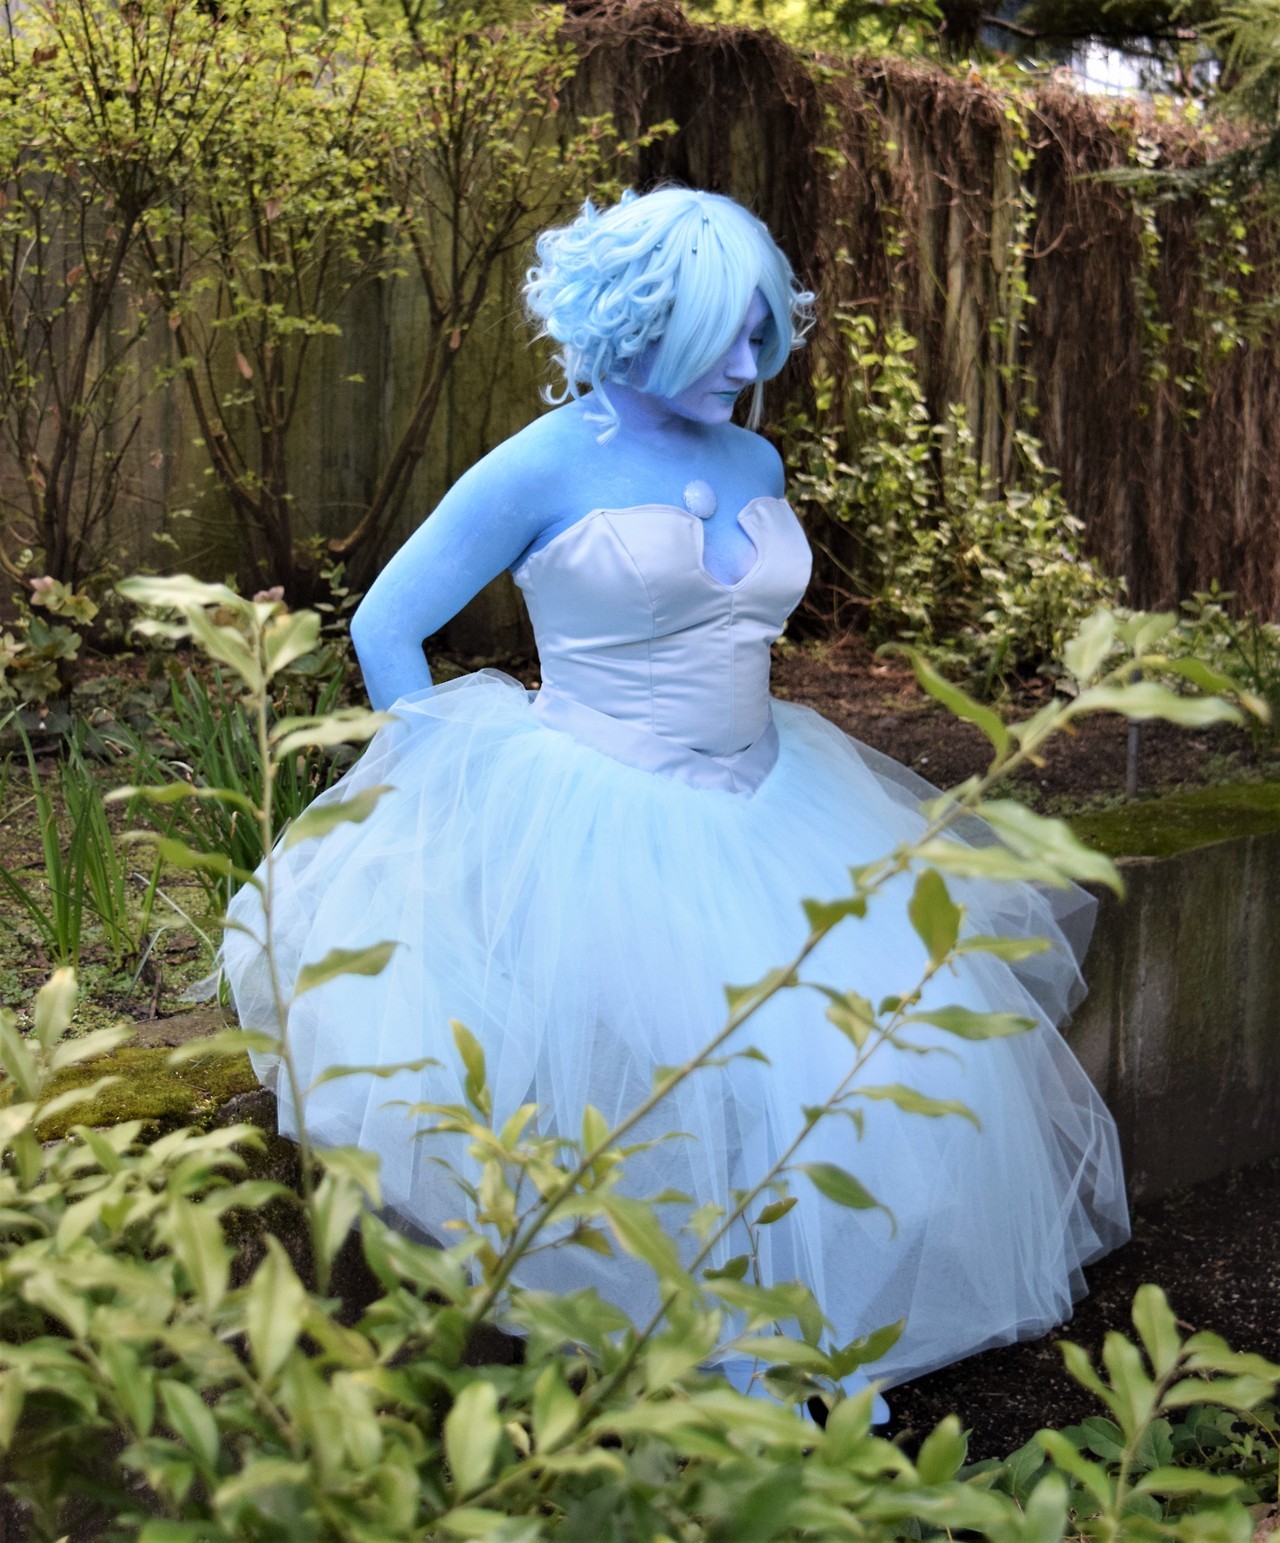 Blue Pearl from Steven Universe at Sakura Con 2017 (photo-set 1) Cosplayer @akemijeans Photos by me.